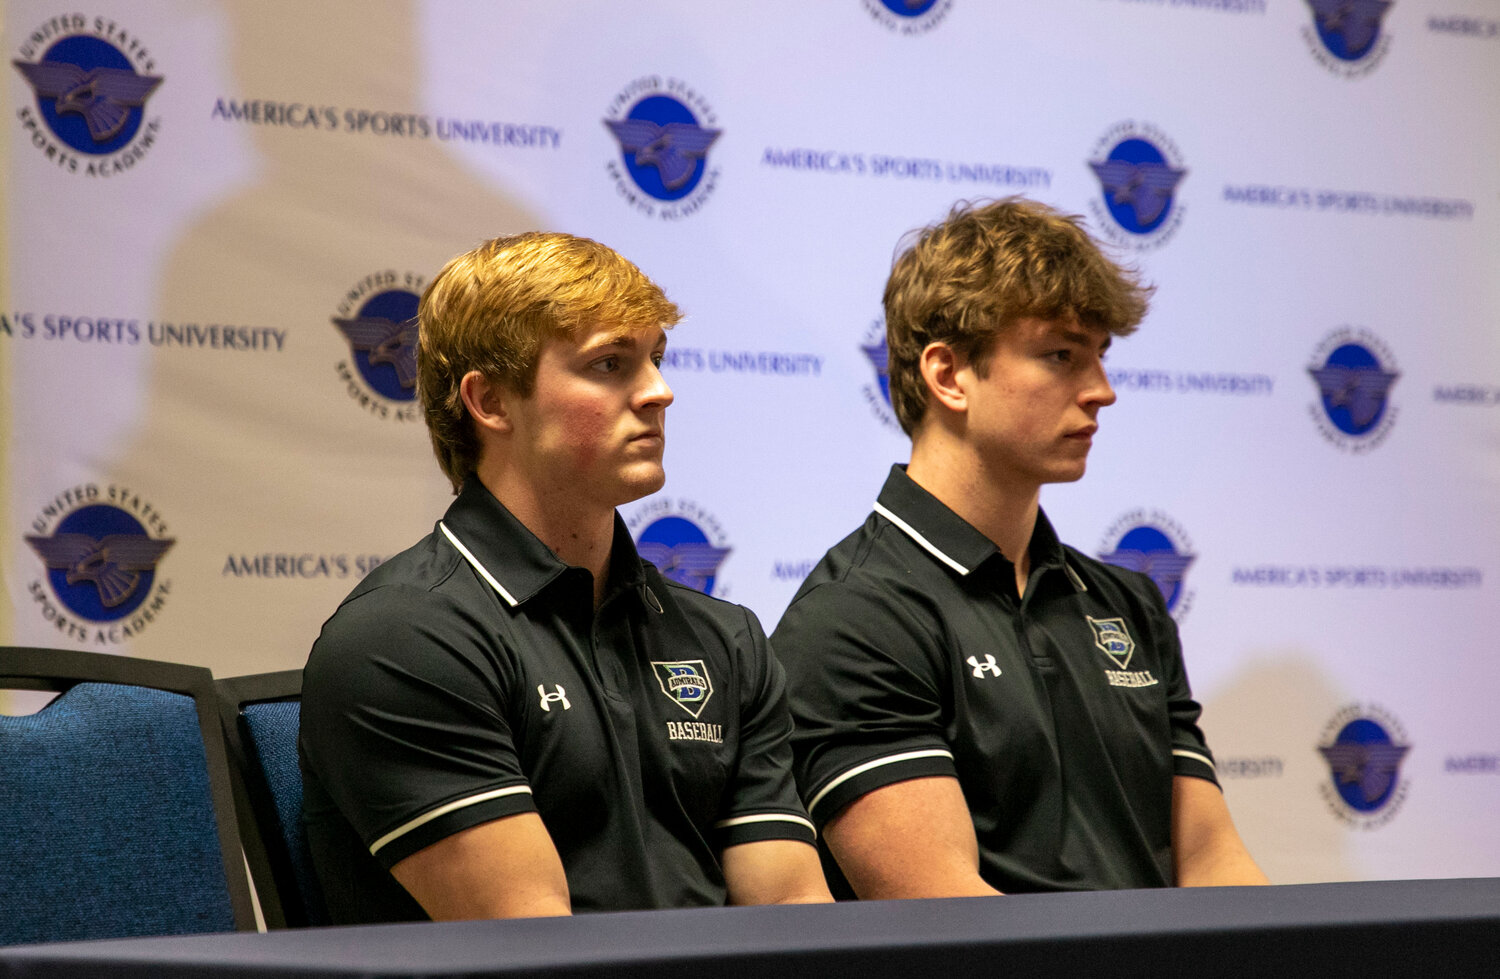 Bayside Academy senior classmates Gatlin Pitts and Teague Broadhead attended the Baldwin County baseball/softball media day at the United States Sports Academy on Tuesday, Feb. 6, where local teams previewed their season. They were joined by another Division I signee, Carson Joyner, in representing the Admirals.